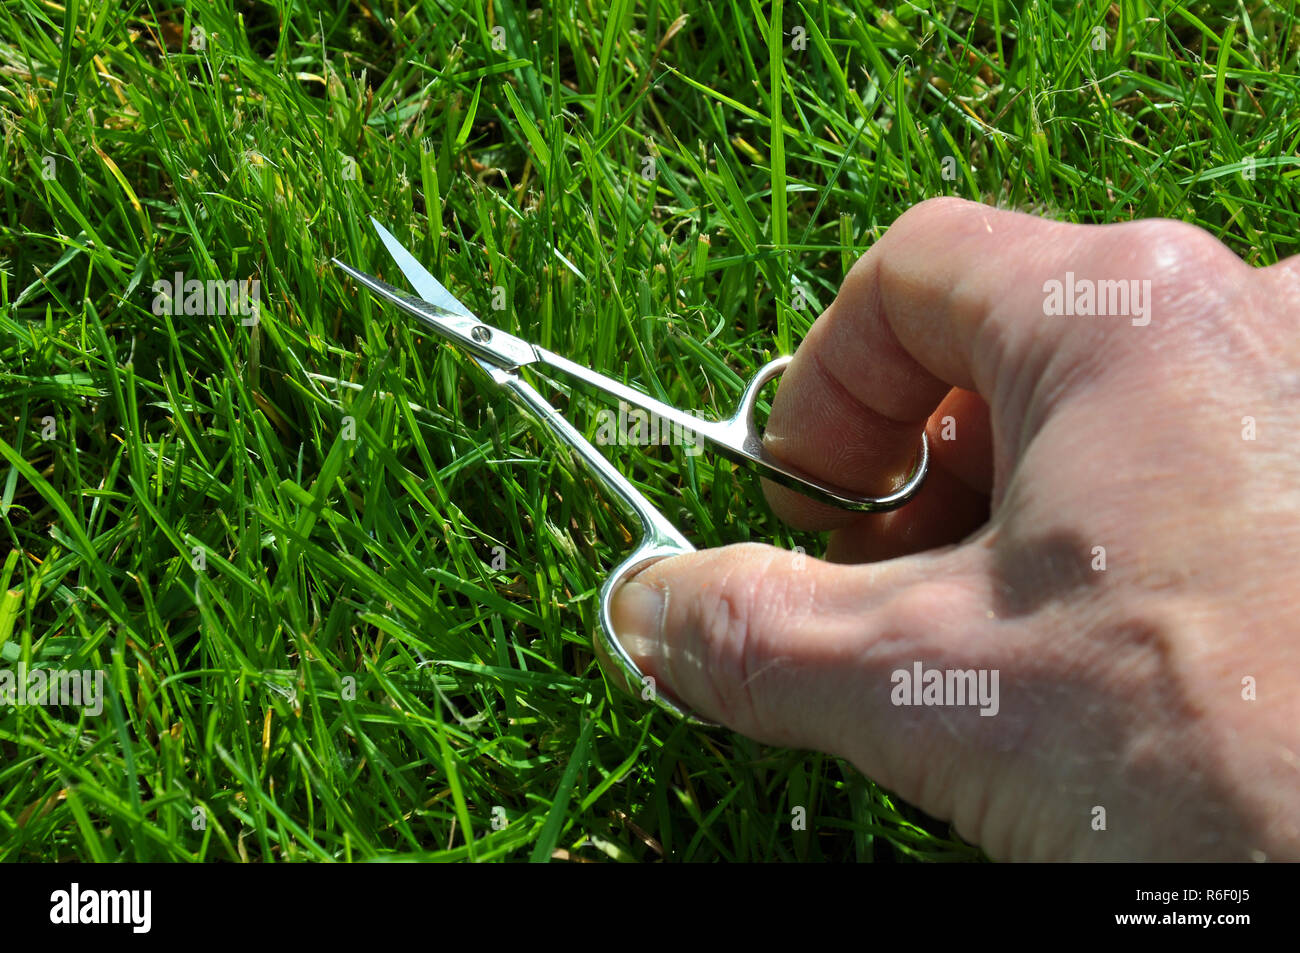 cut the lawn with nail scissors Stock Photo